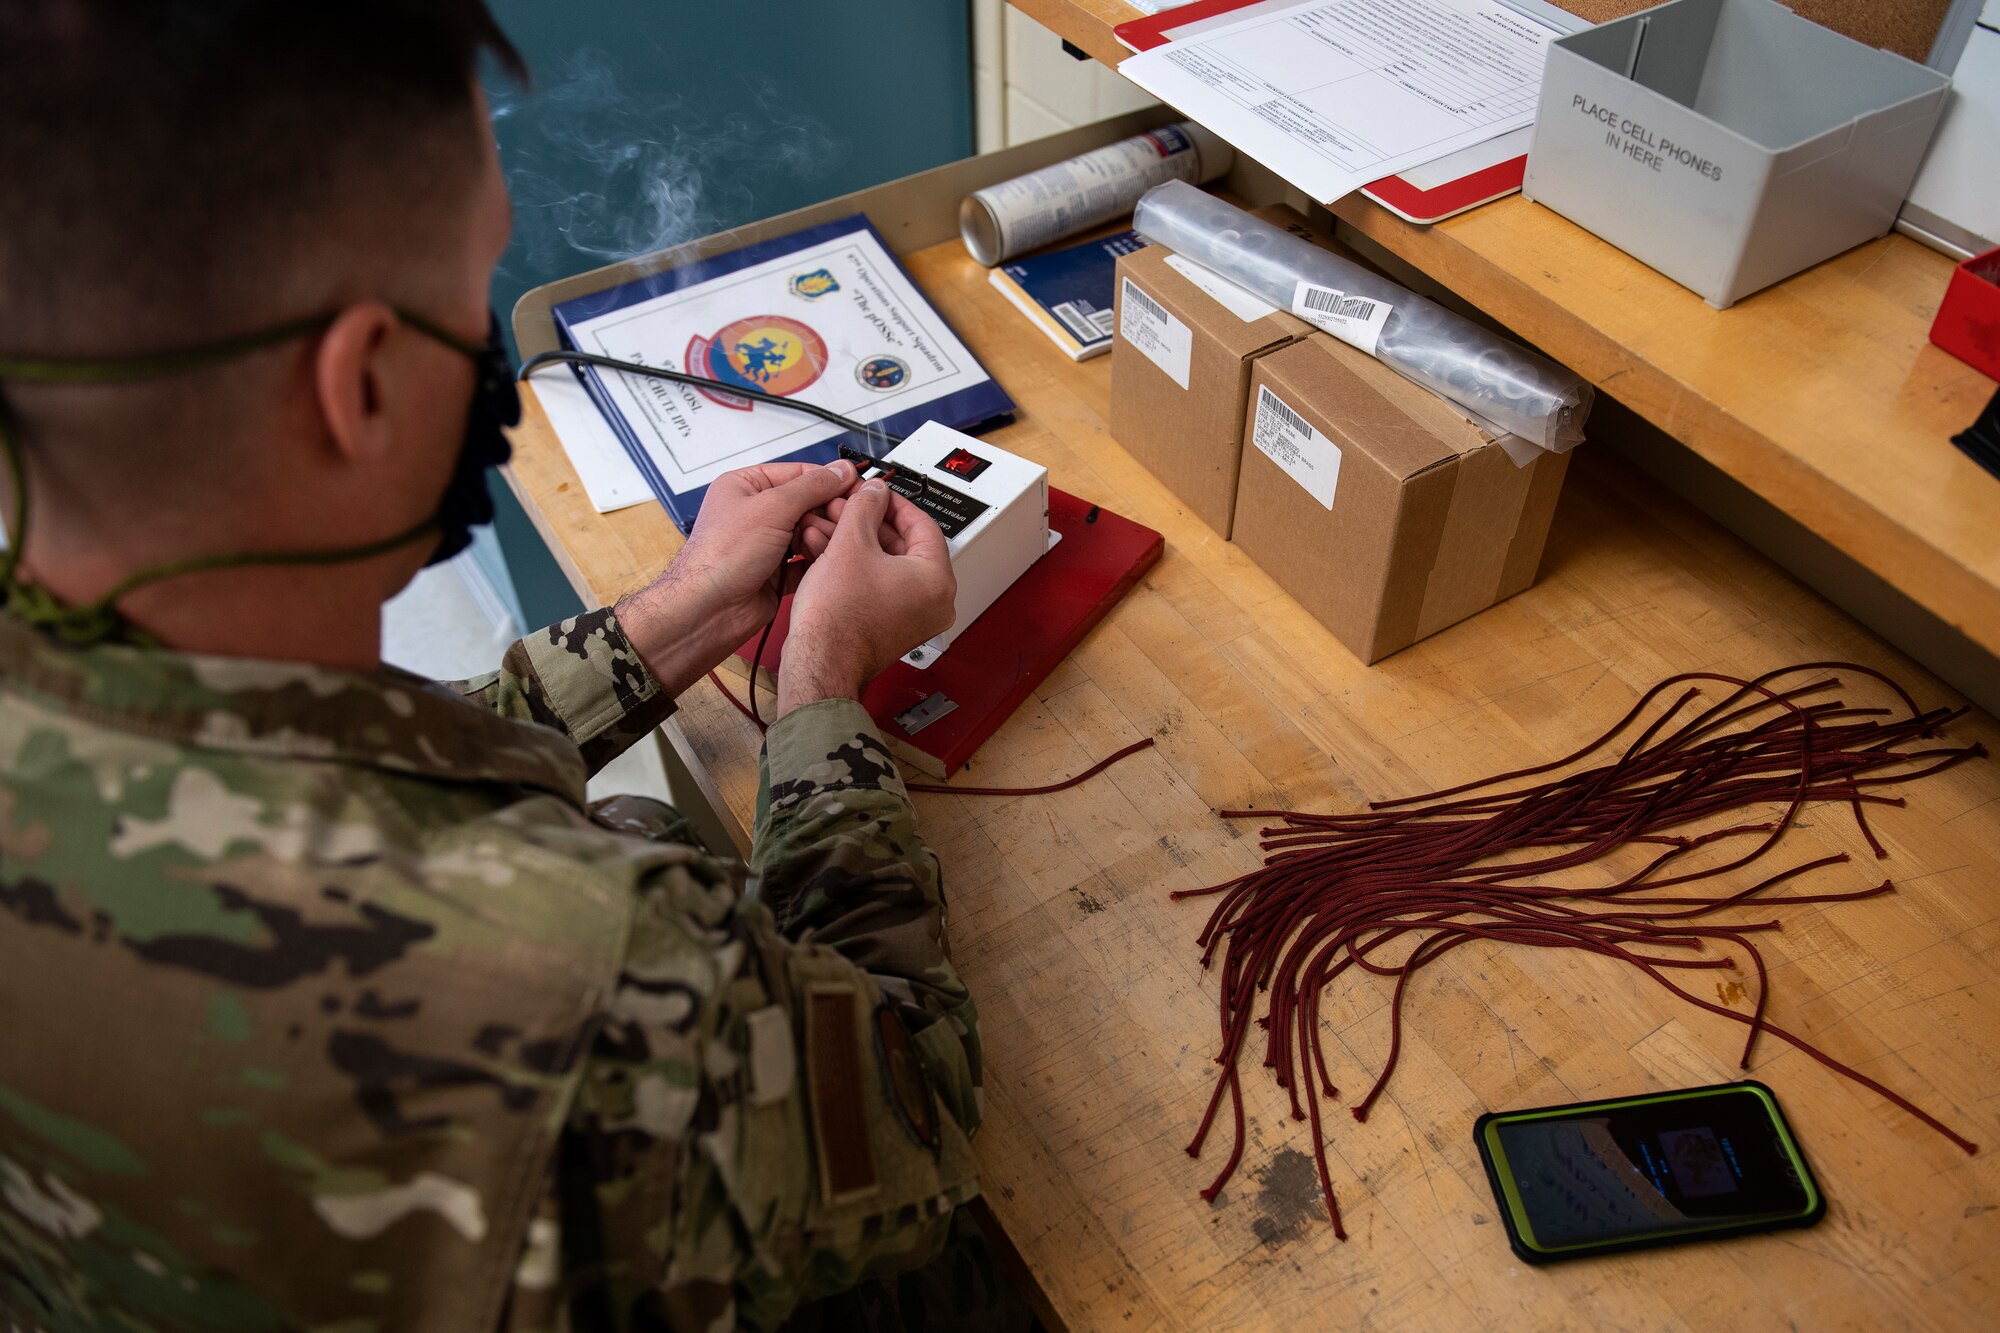 ALTUS AIR FORCE BASE, Okla. - U.S. Air Force Tech. Sgt. Jeremy Gutsch, the Assistant Flight chief of Air Crew Flight Equipment (AFE) assigned to the 97th Operations Support Squadron, prepares materials for making face masks for base members, April 6, 2020 at Altus Air Force Base Oklahoma.